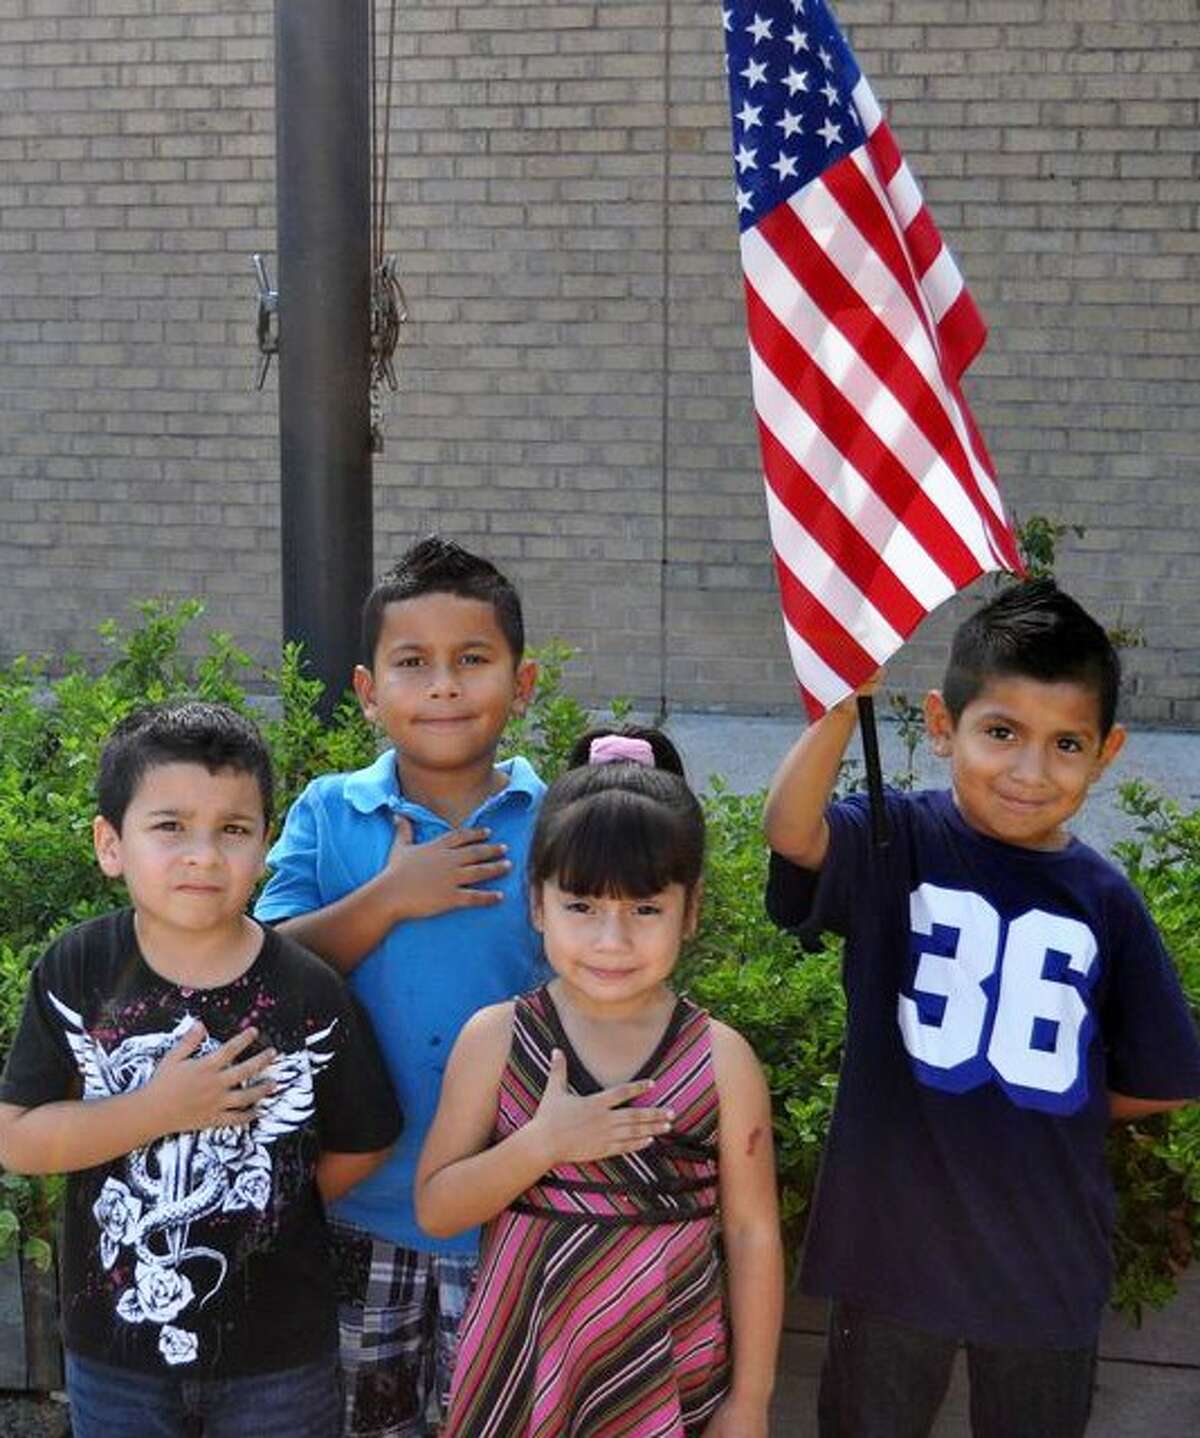 Creighton Kindergarten students have been studying the American Flag and learning the Pledge of Allegiance. Pictured are (left to right) Alexis Garcia, Rigoberto Macis, Valeria Andrade, and Andres Quintero.